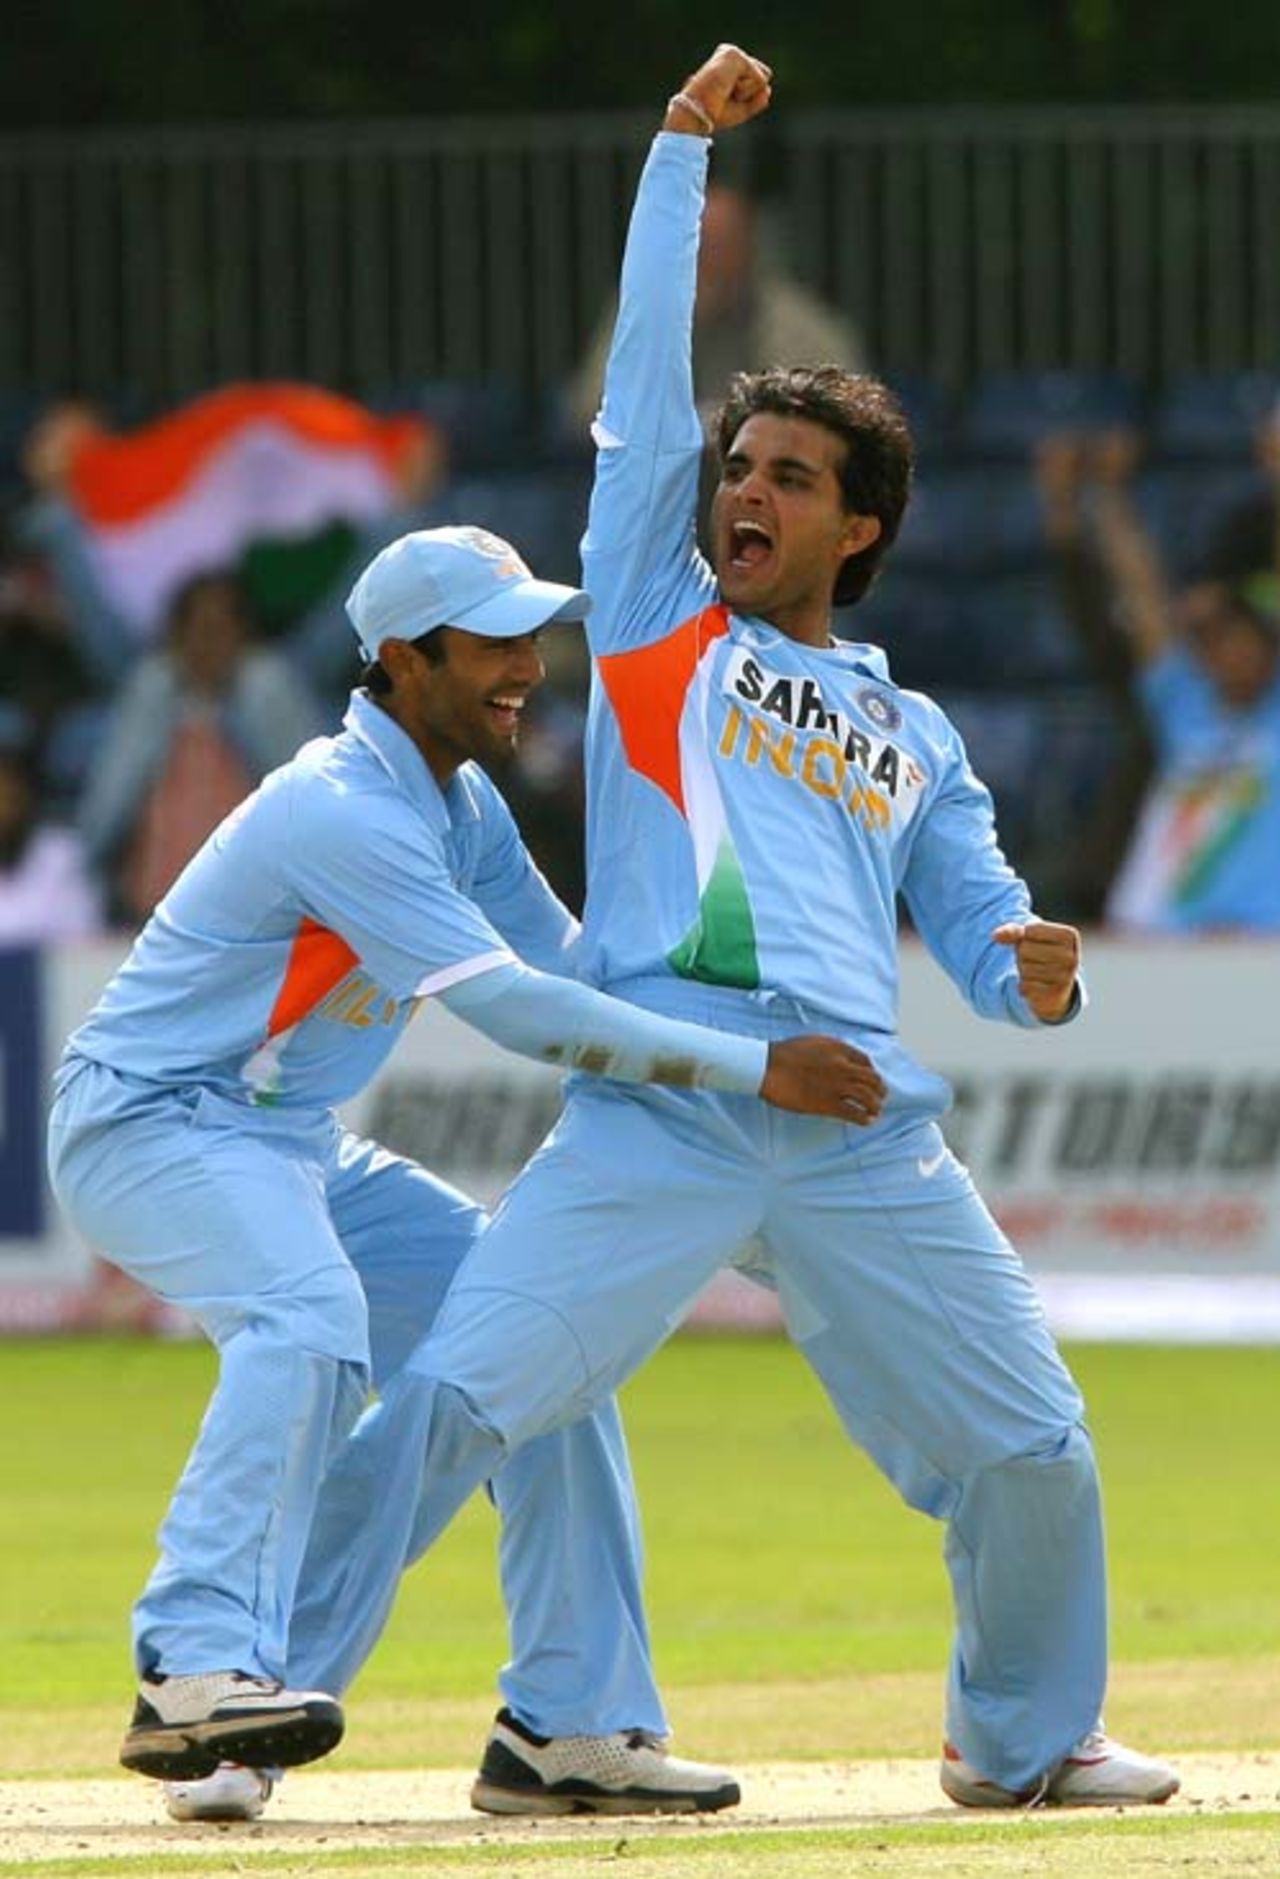 Sourav Ganguly and Dinesh Karthik are elated after bagging JP Duminy's wicket, India v South Africa, 3rd ODI, Belfast, July 1, 2007